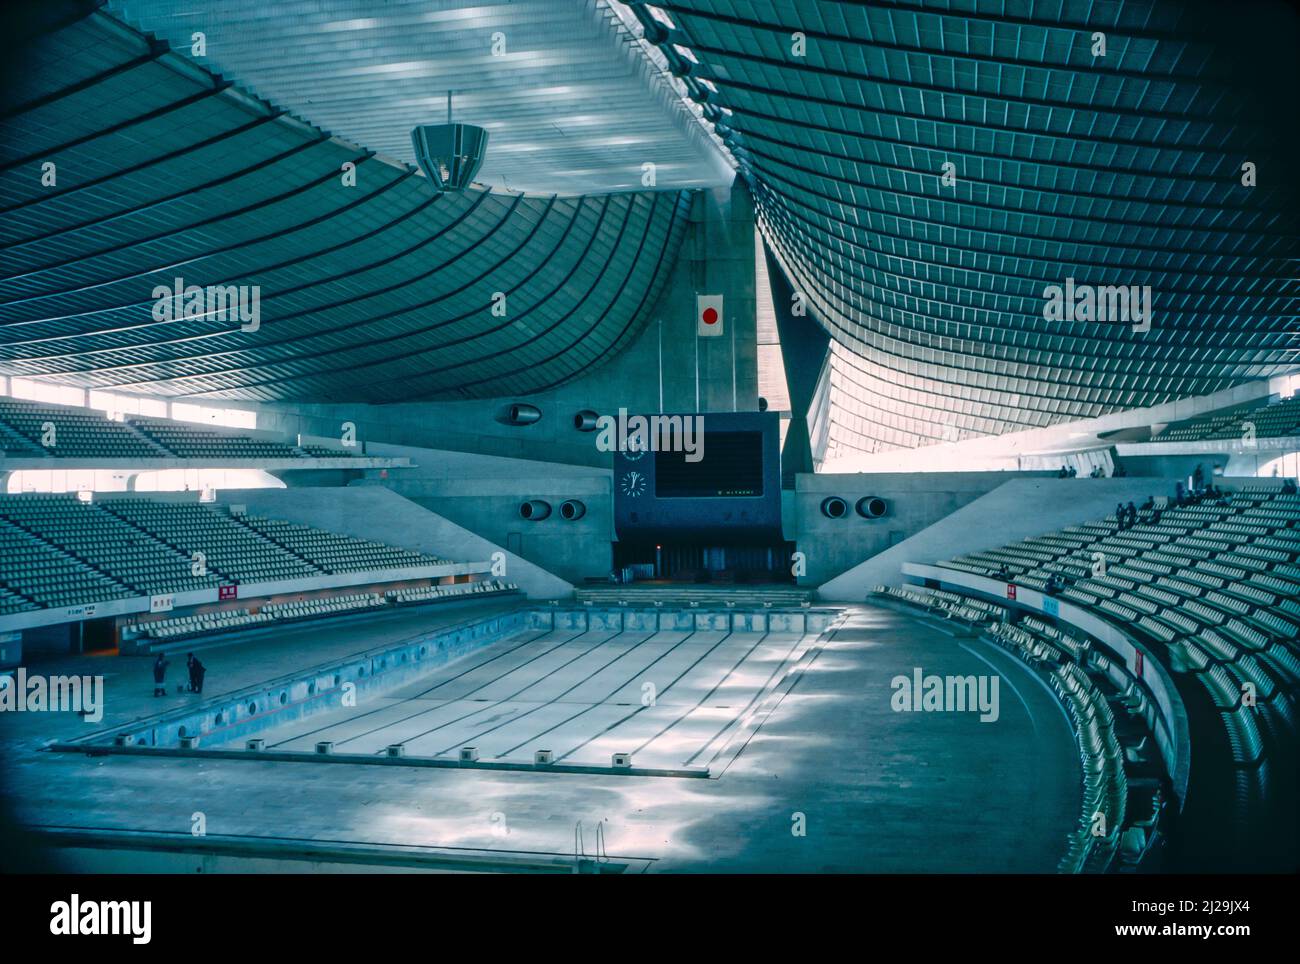 Yoyogi National Stadium is an indoor arena at Yoyogi Park in Shibuya, Tokyo, famous for its suspension roof design. It was designed by Kenzo Tange and built to house aquatic events in the 1964 Summer Olympics. Stock Photo